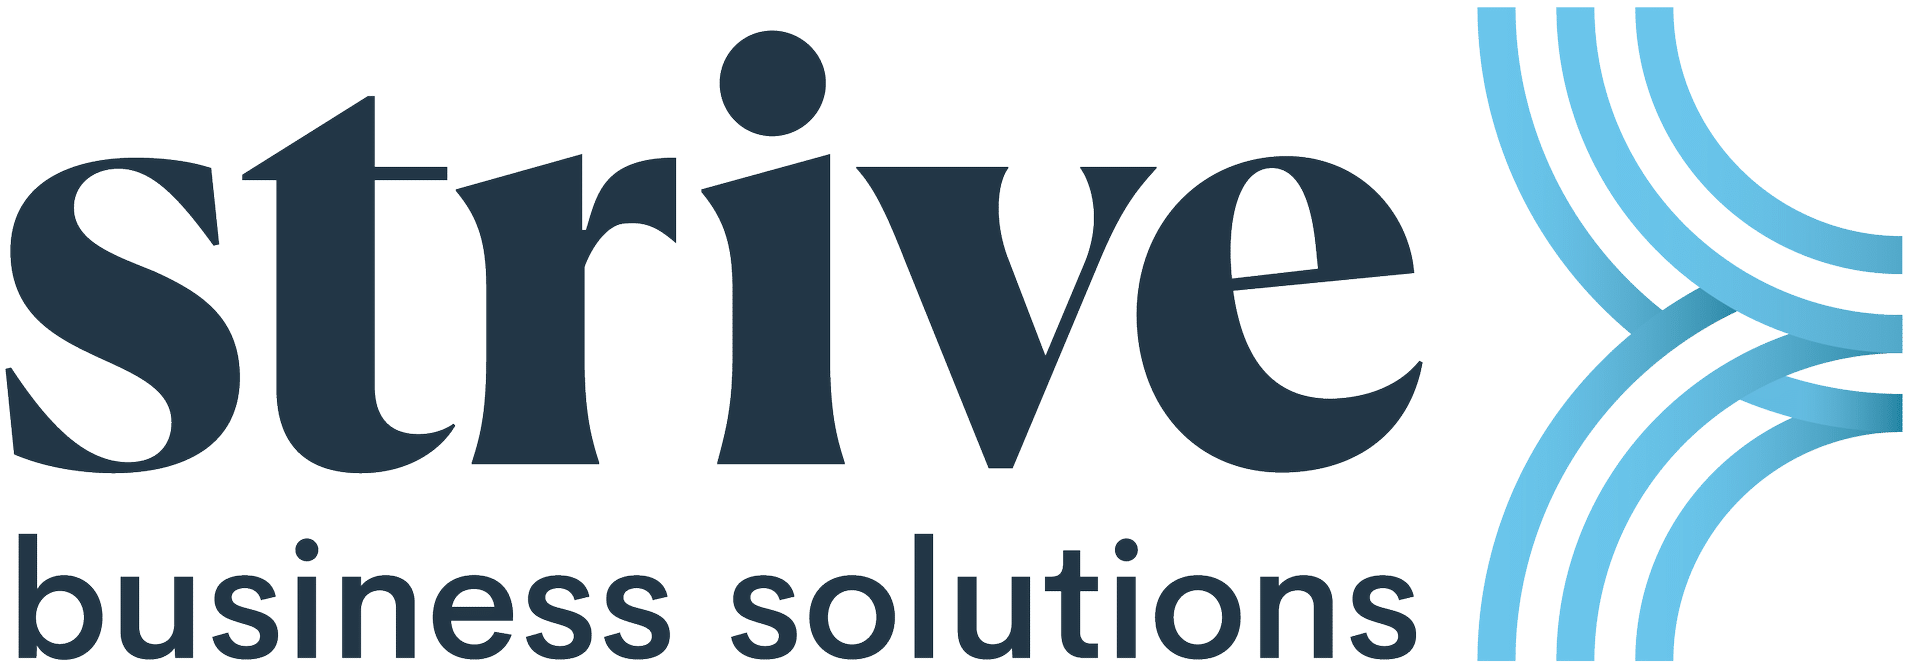 Strive Business Solutions Logo